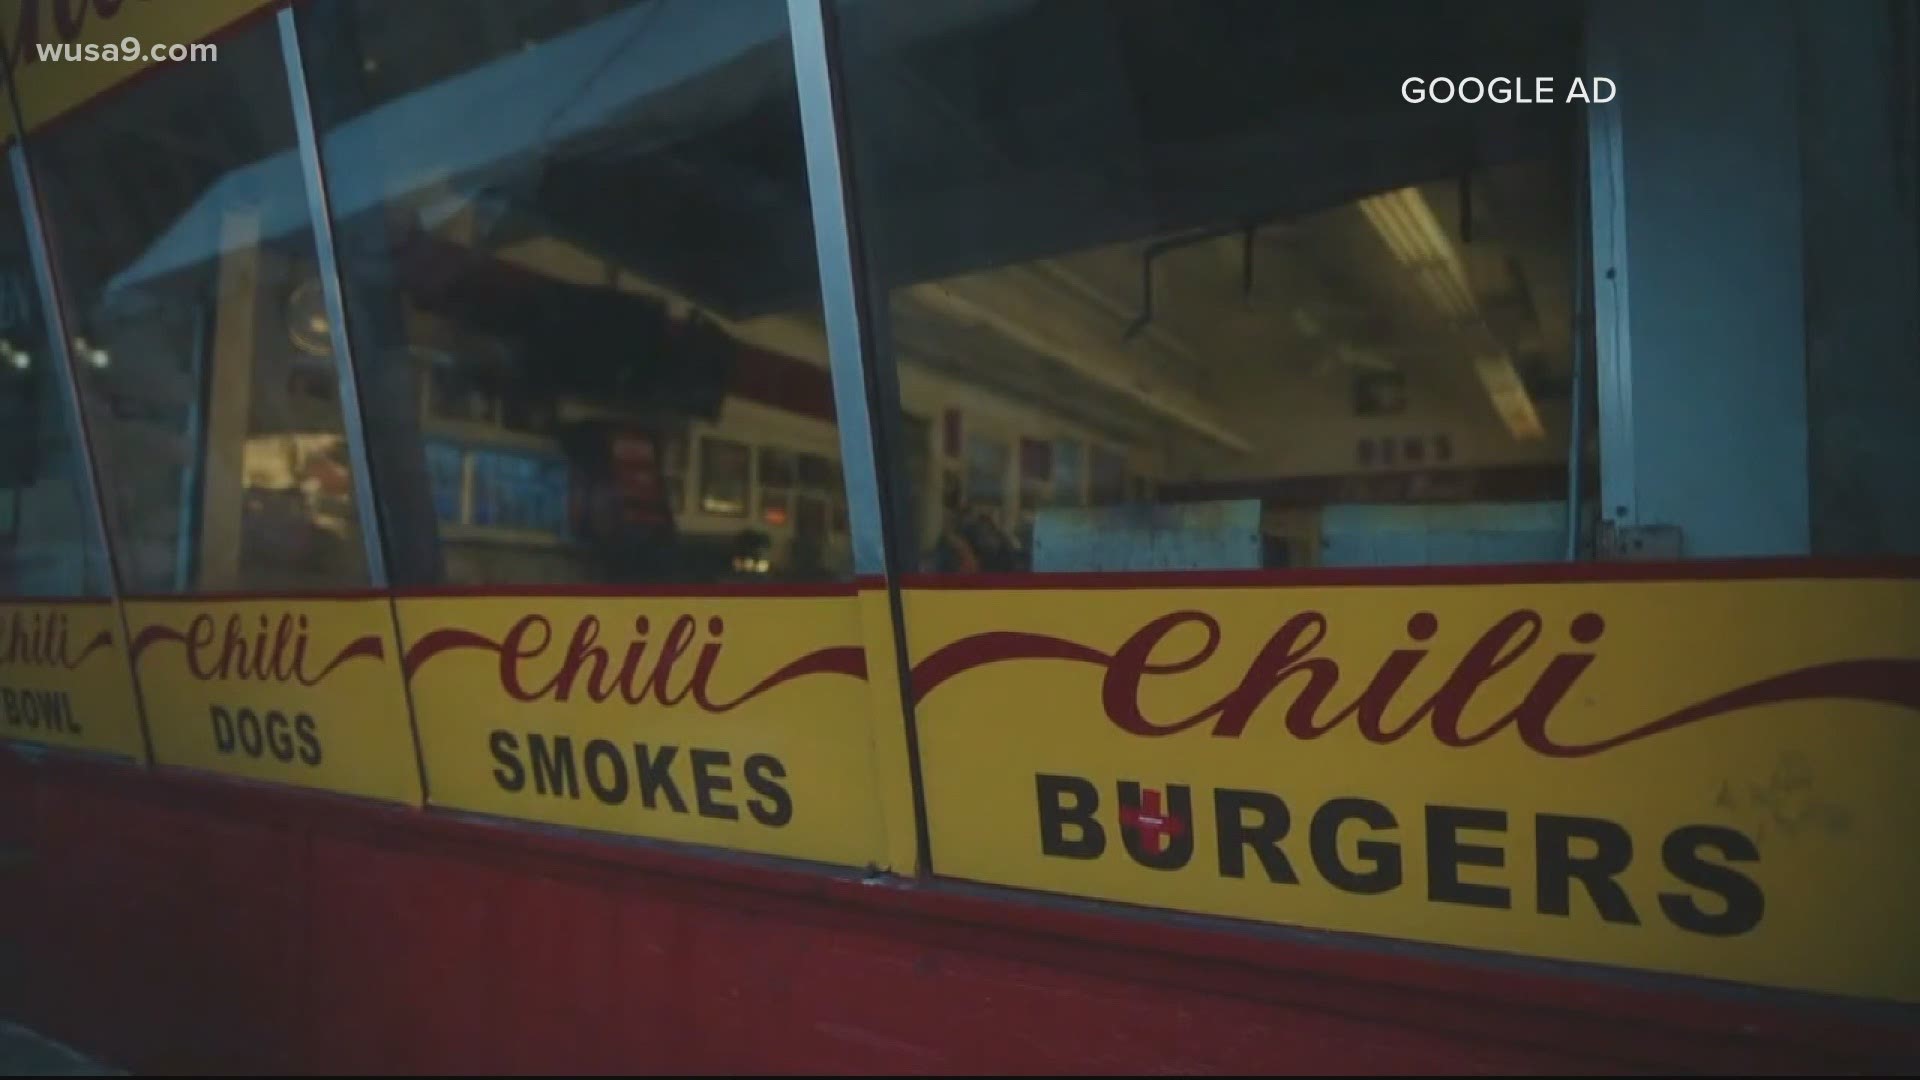 The historic D.C. restaurant is getting national attention thanks to the new ad.